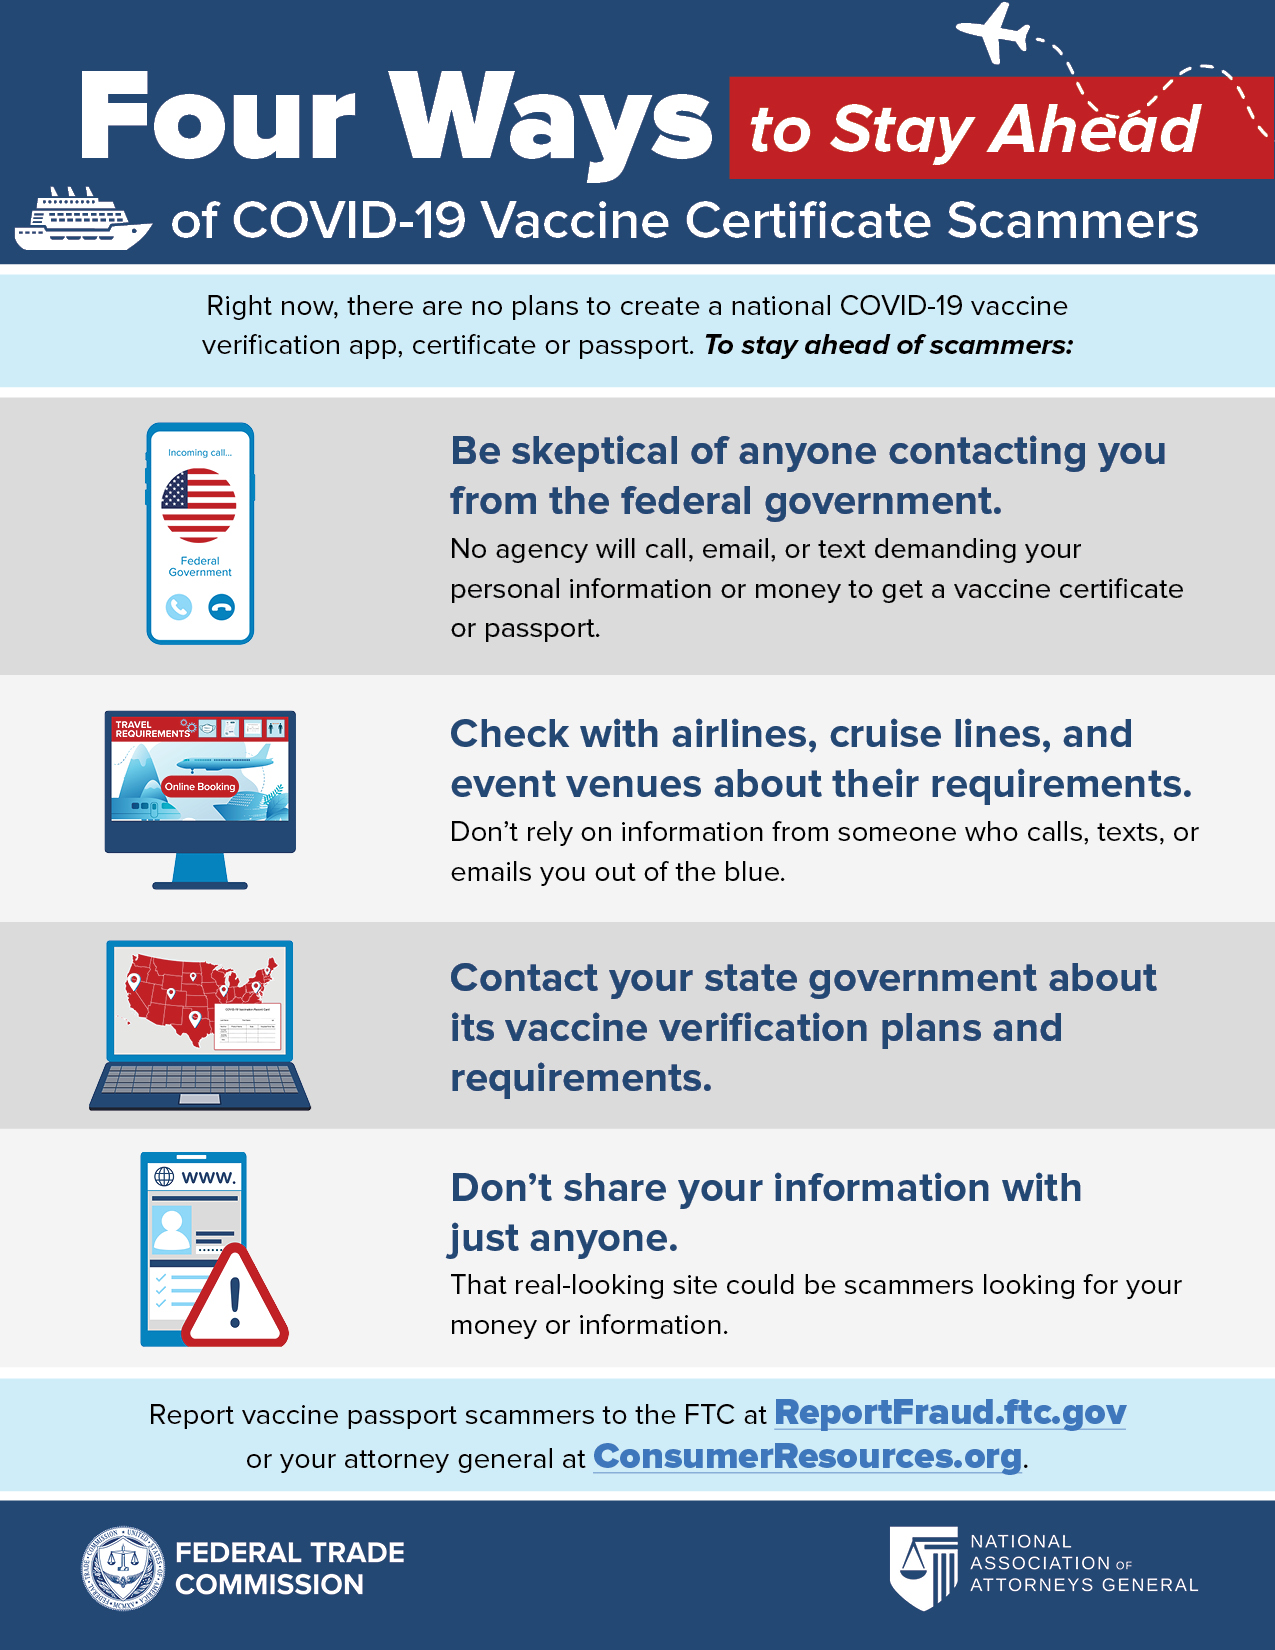 Four ways to stay ahead of Covid-19 certificate scammers